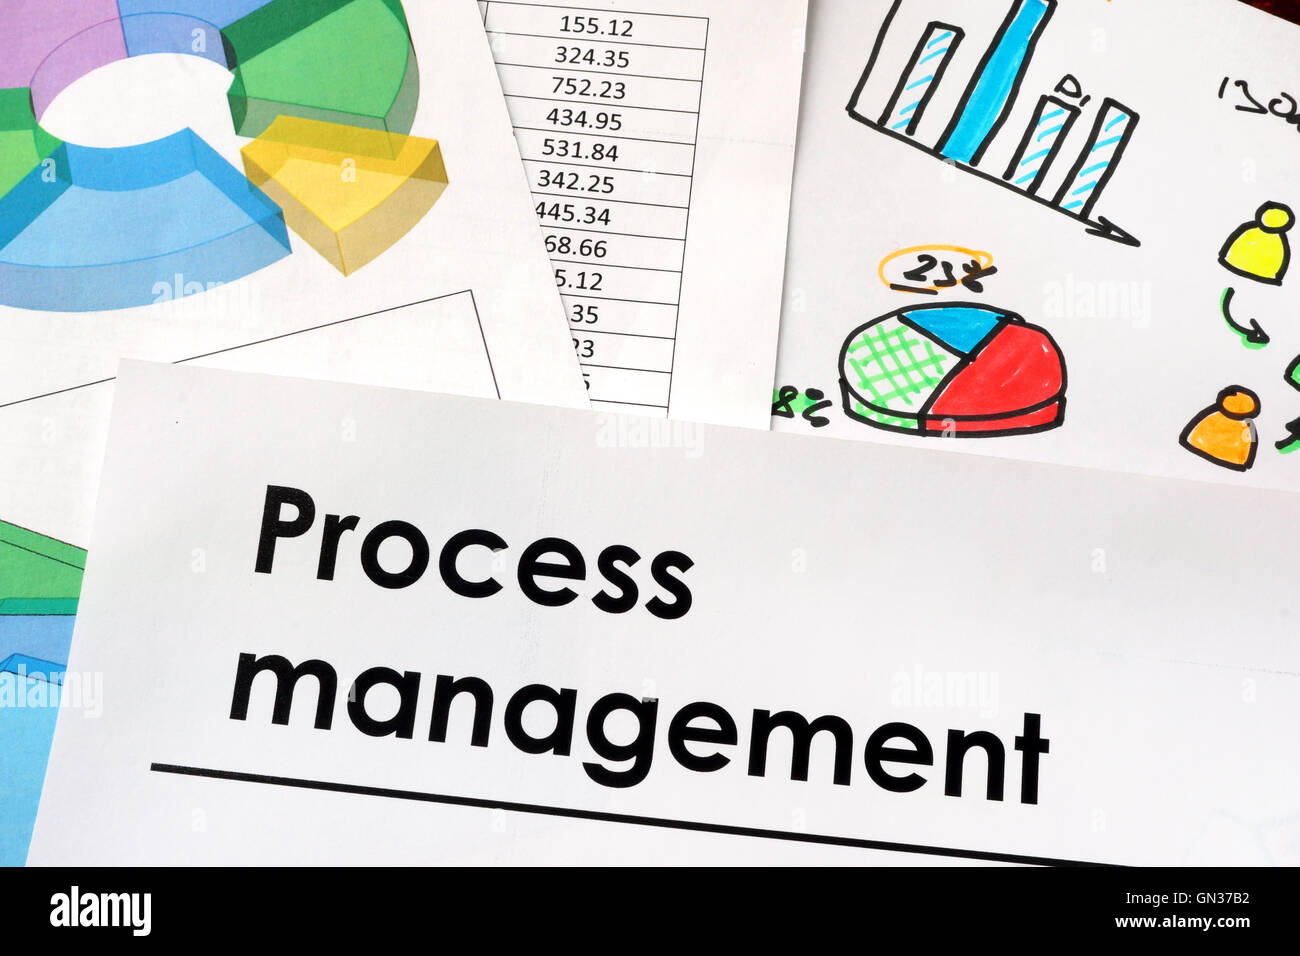 Process management sign written on a paper. Stock Photo